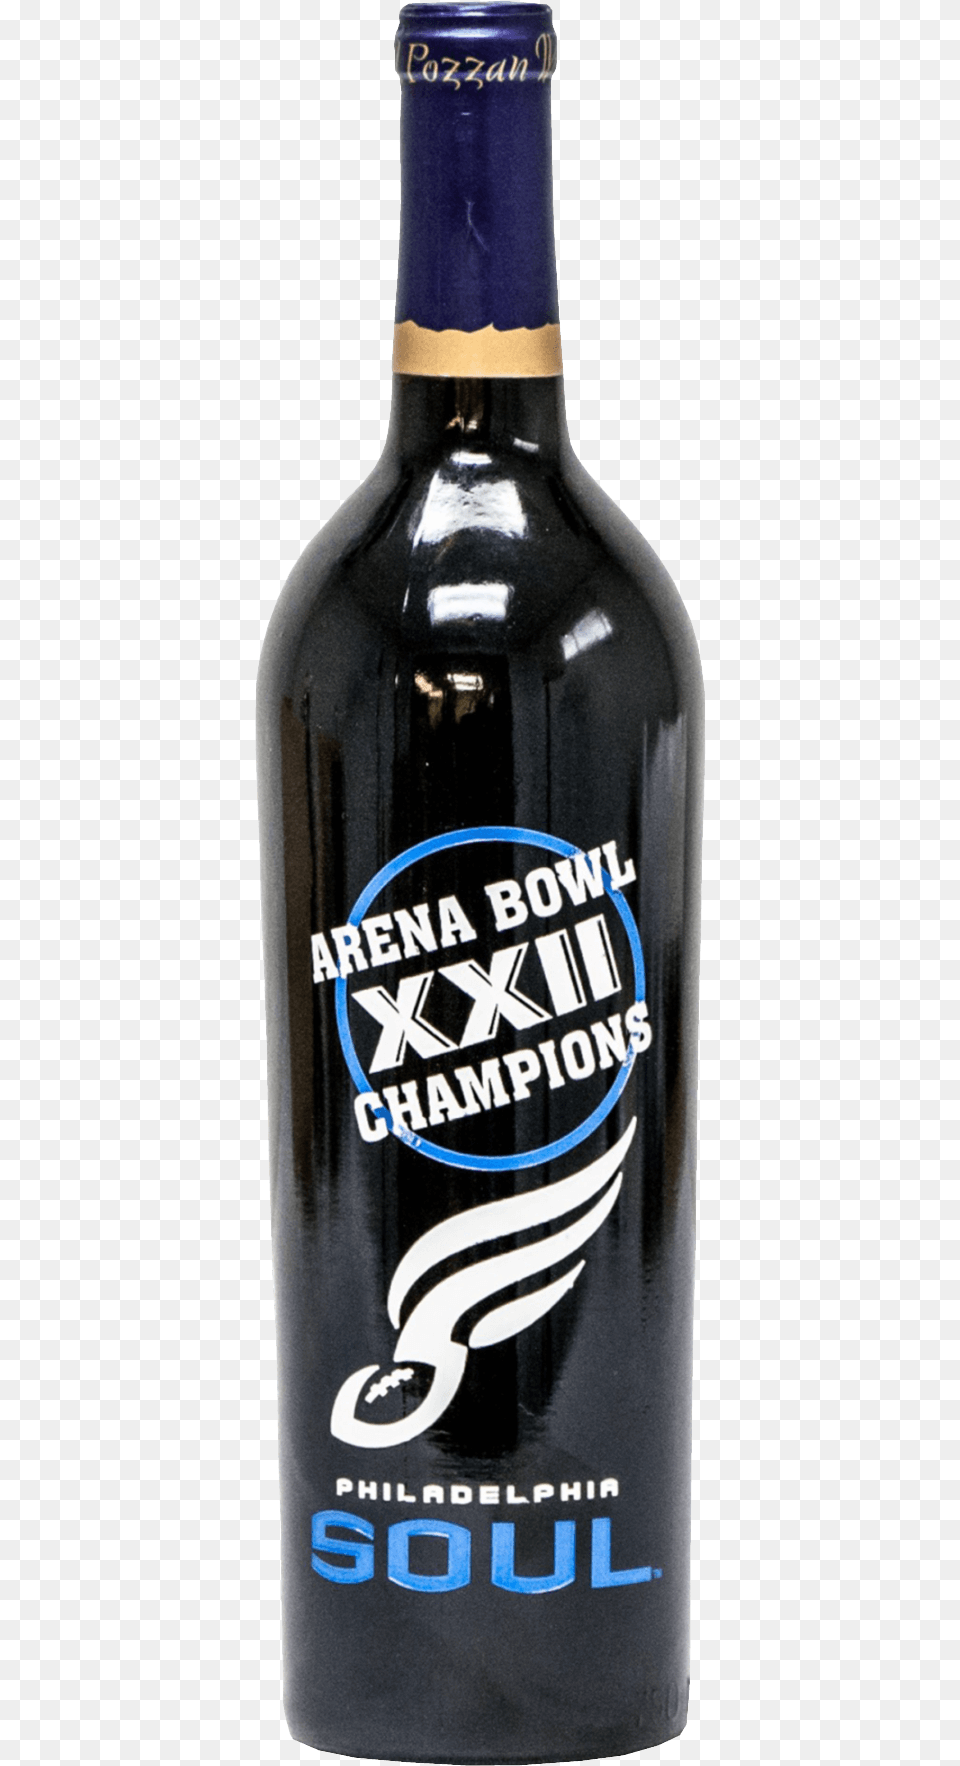 Any Glass Beverage Bottle With Sufficient Engraving Two Liter Bottle, Alcohol, Beer, Stout, Liquor Png